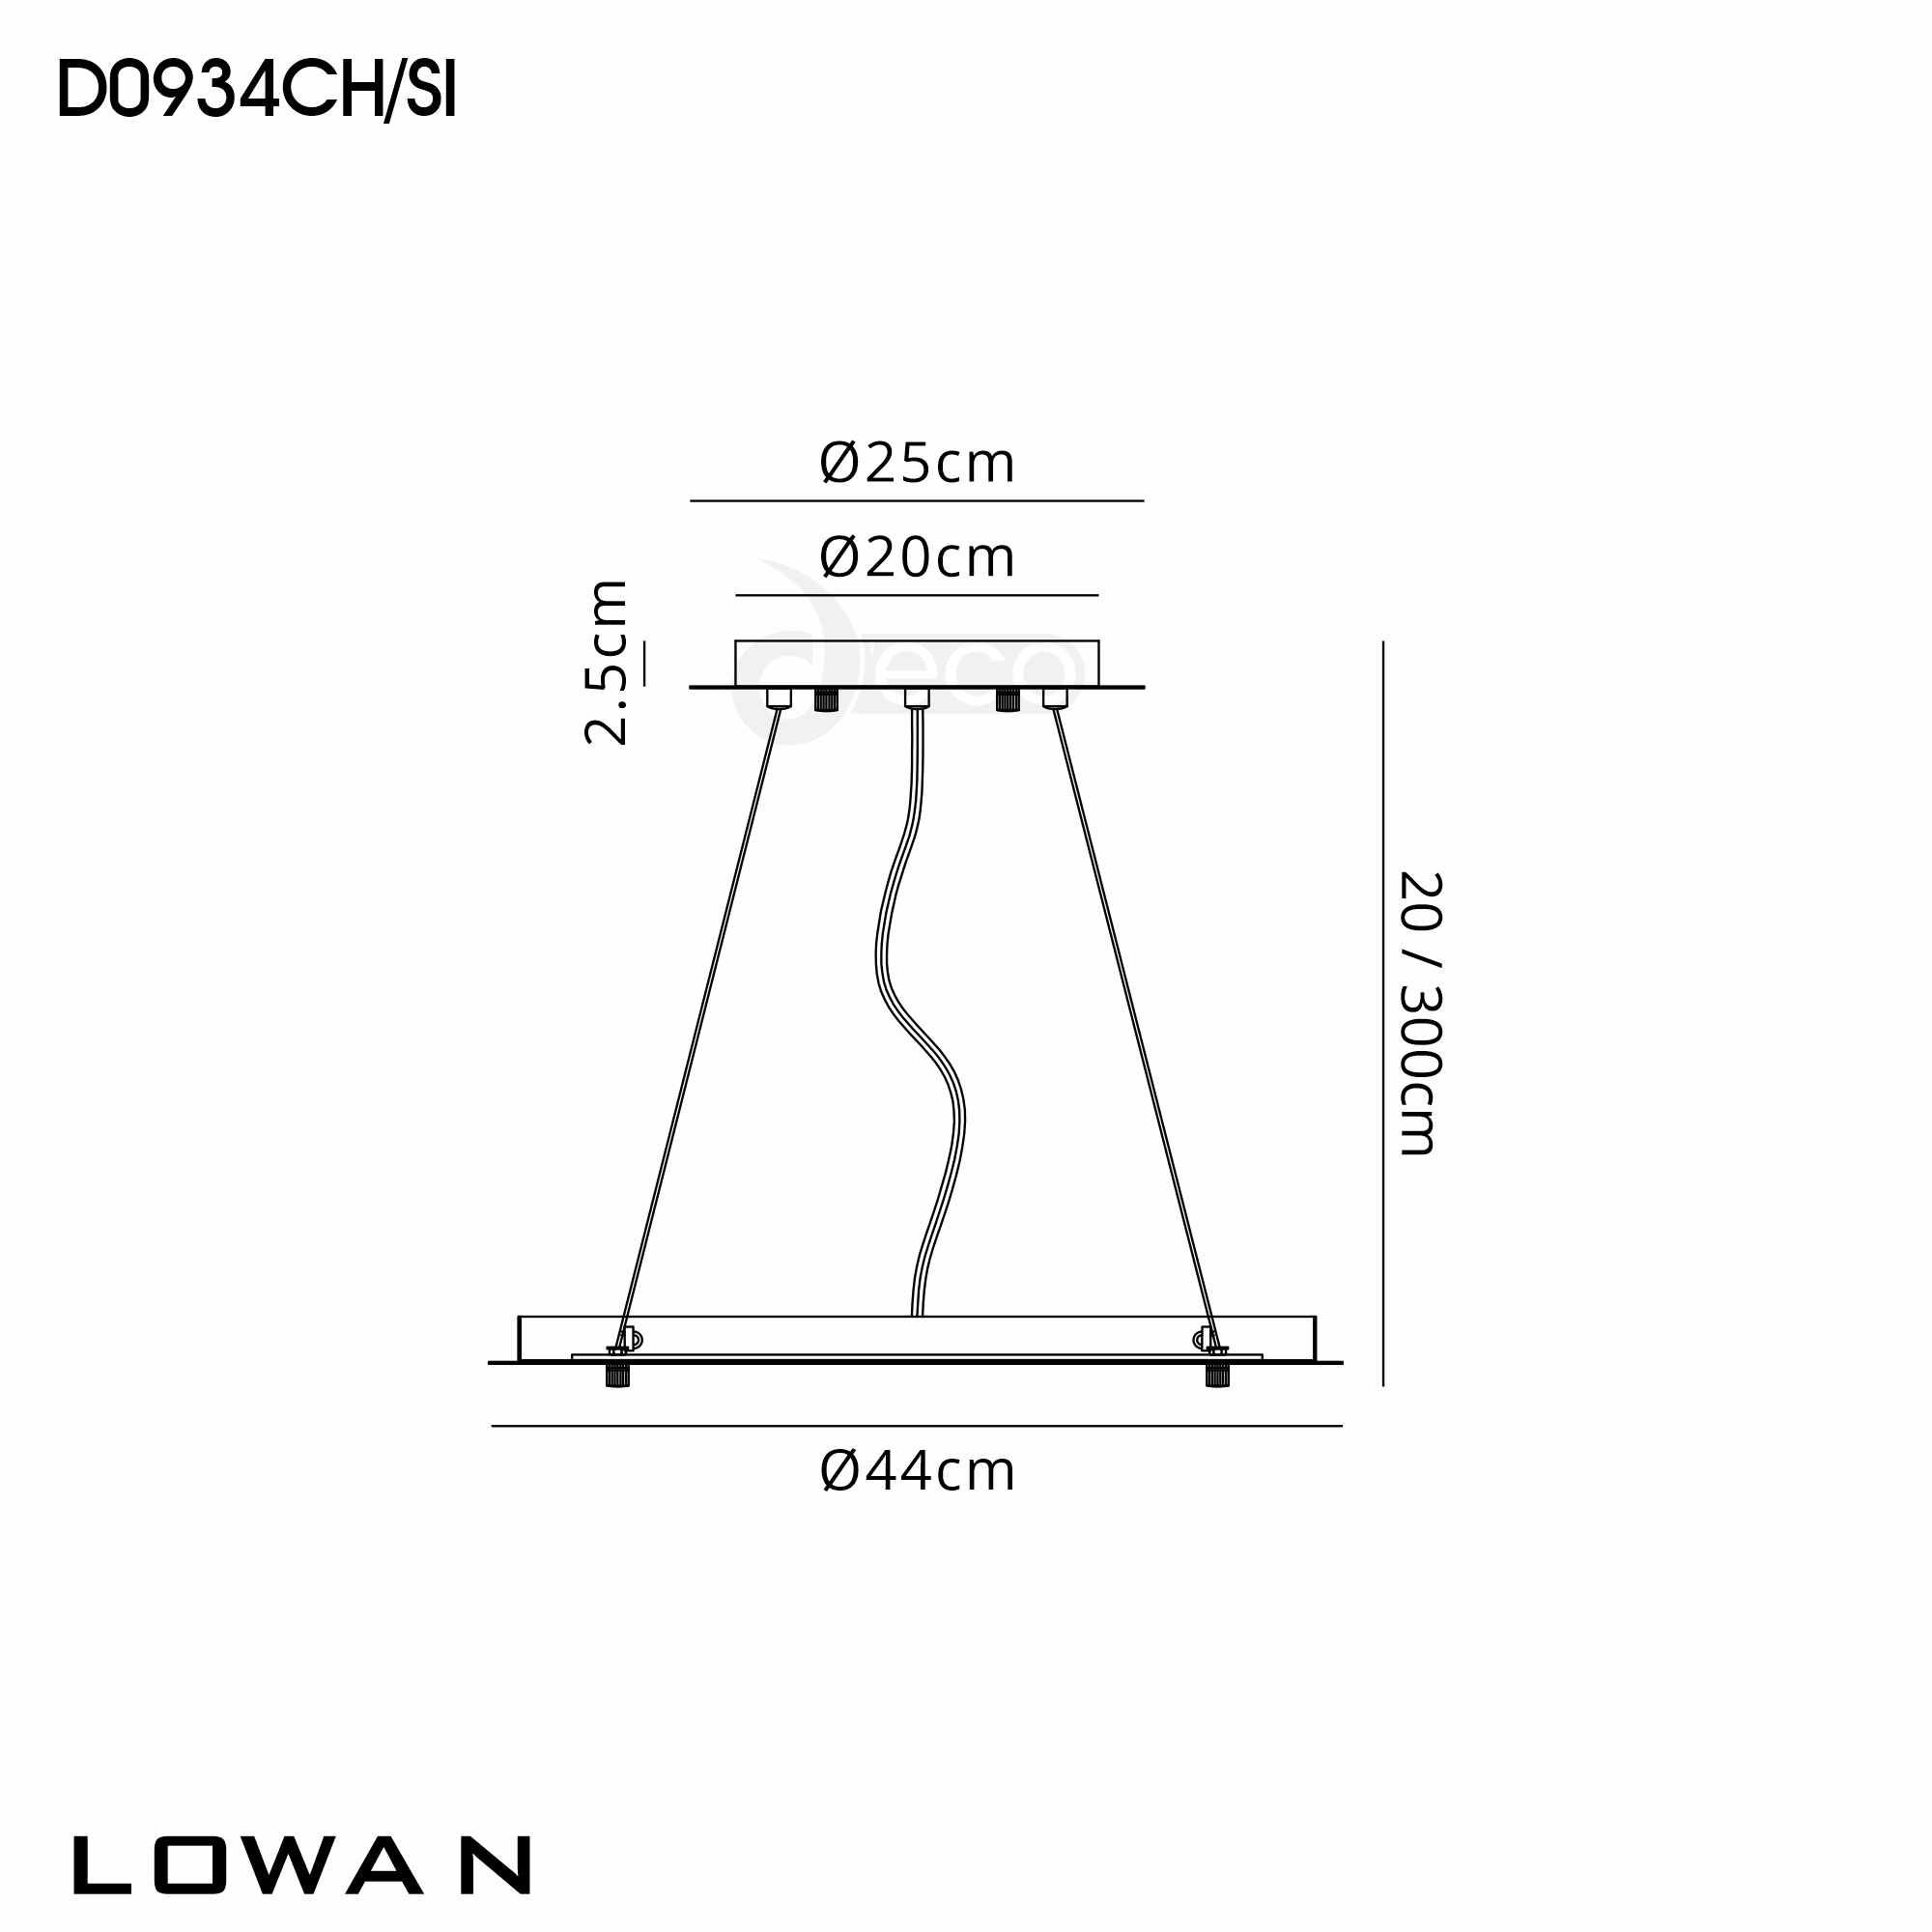 D0934CH/SI  Lowan 440mm, 3m Suspension Plate c/w Power Cable To Lower Flush Fittings, Polished Chrome/Silver Max Load 40kg (ONLY TESTED FOR OUR RANGE OF PRODUCTS)